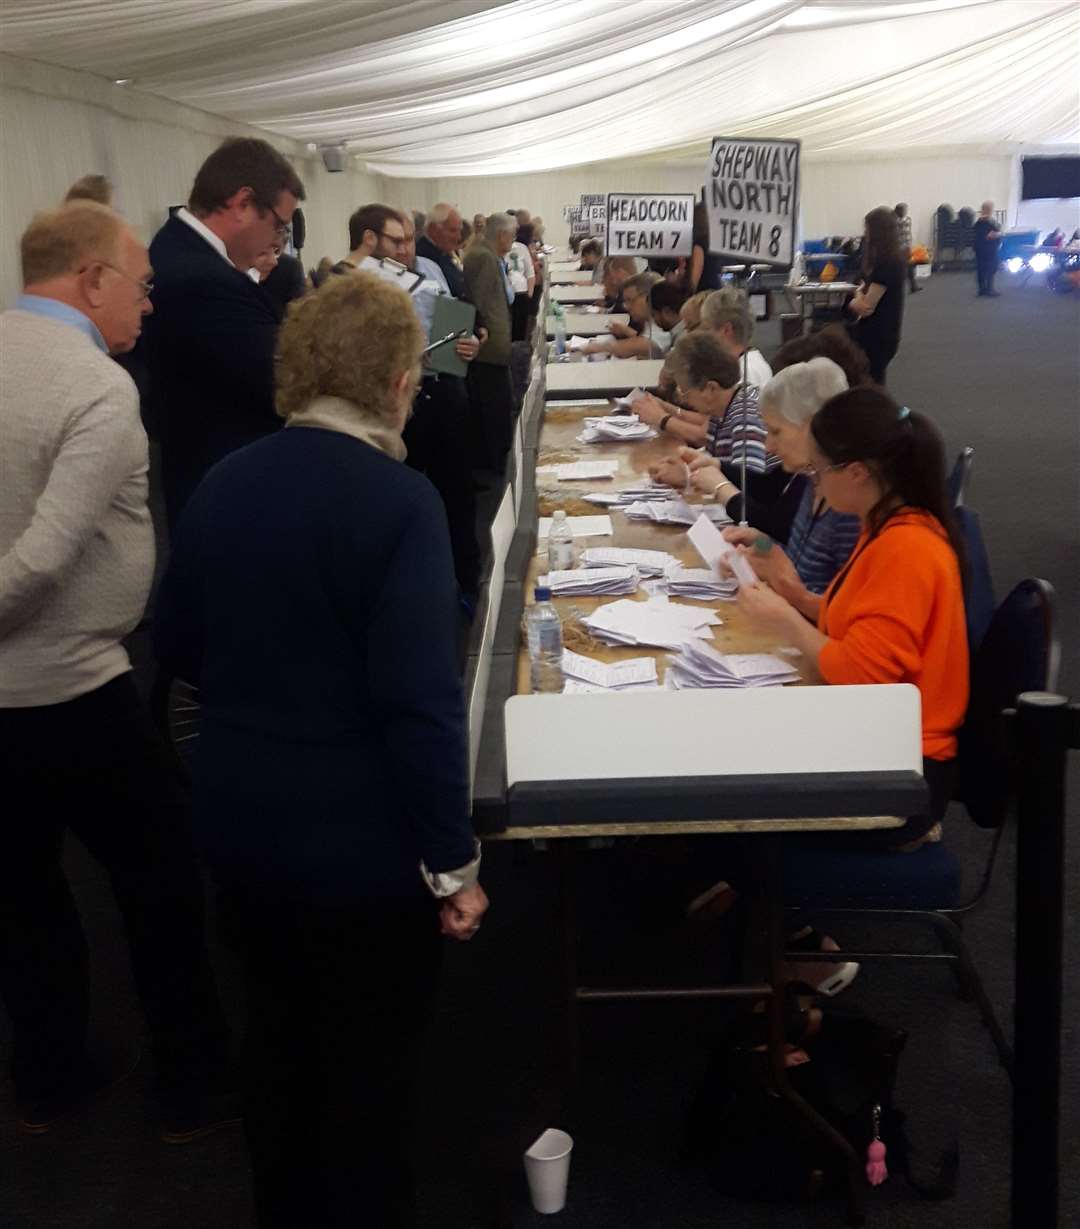 The counting tellers will face a long haul next May